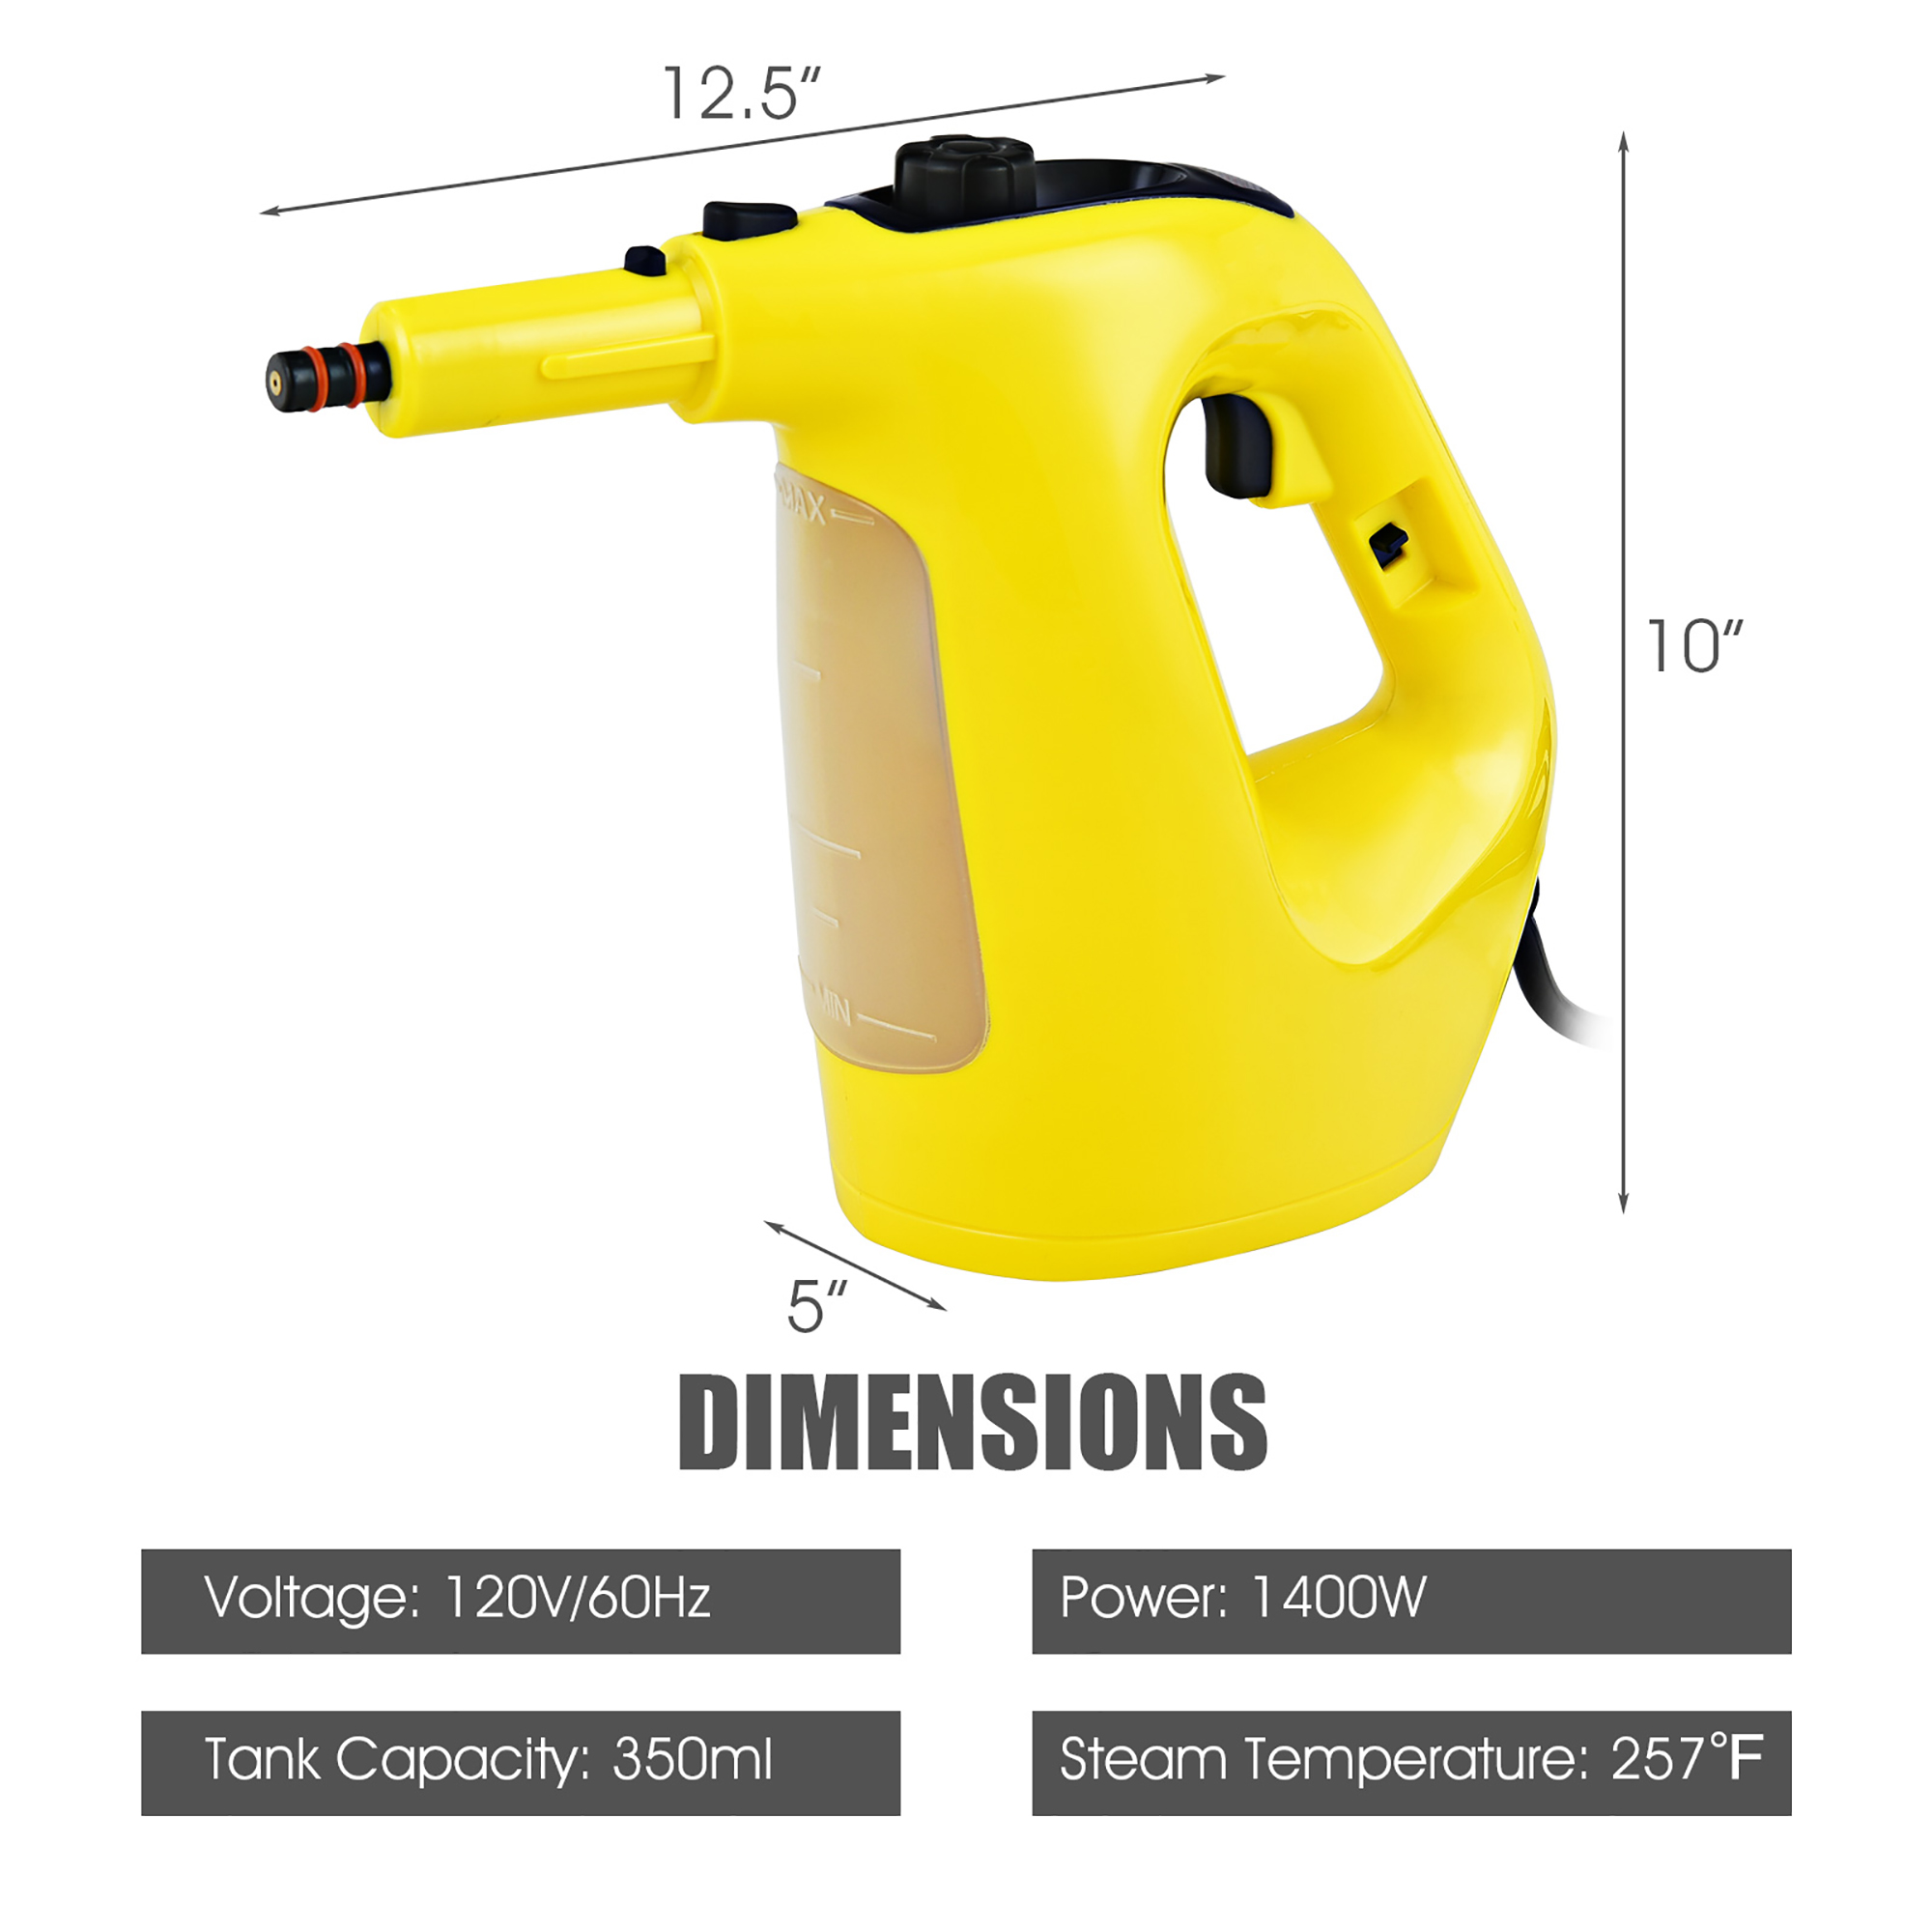 1400W Multipurpose Pressurized Steam Cleaner Mop W/ 17 Pieces Accessories Yellow - image 3 of 10